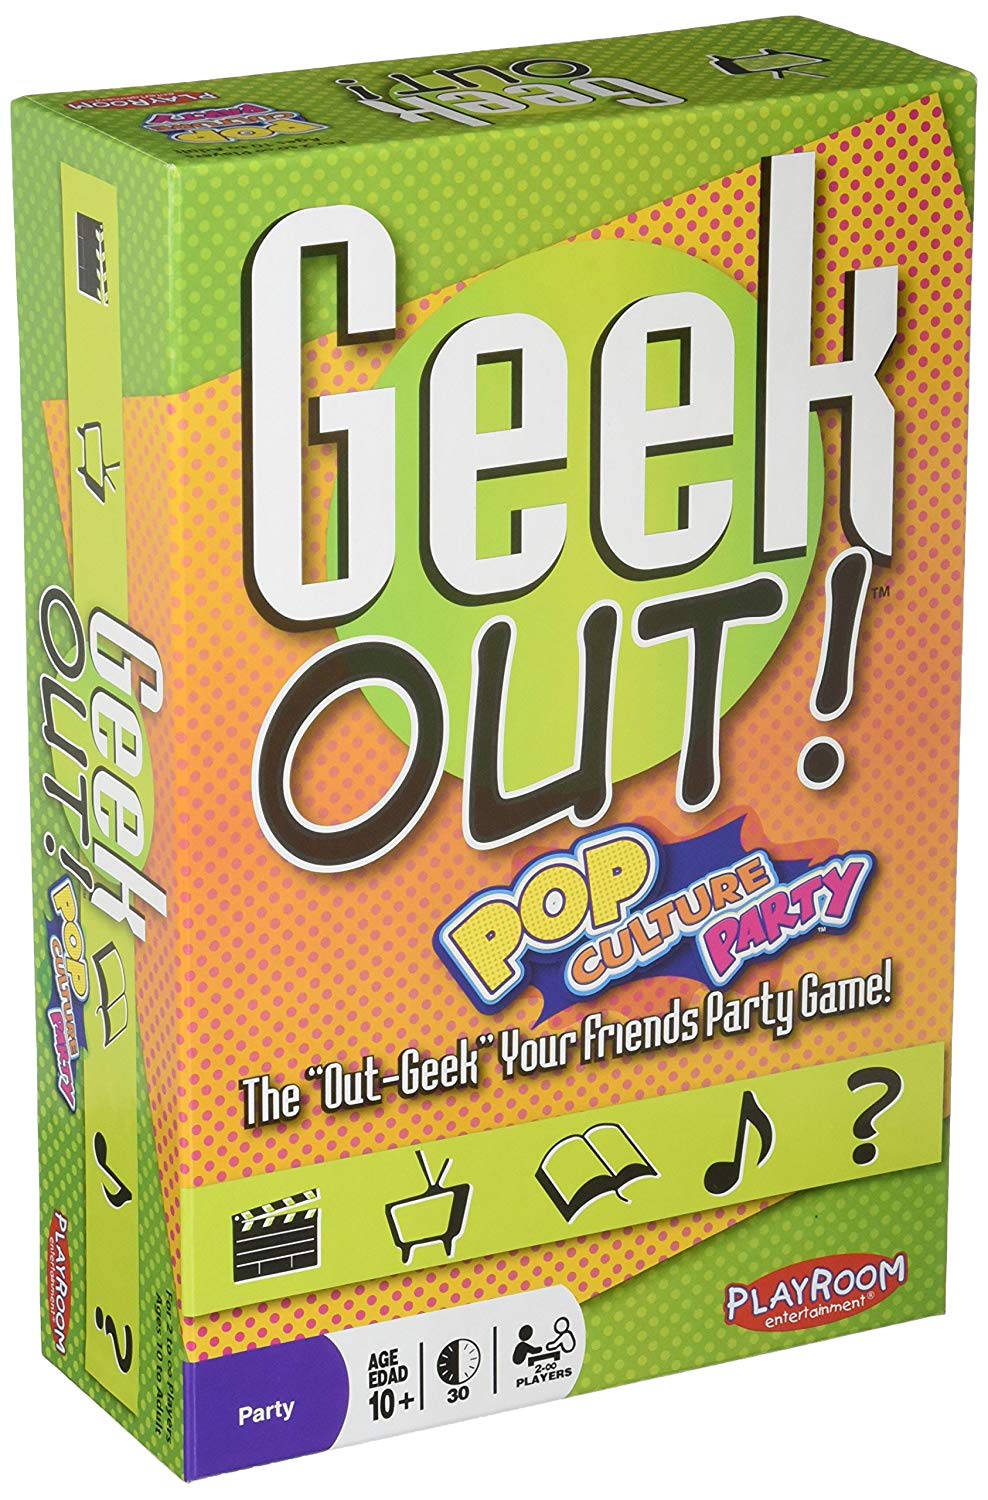 Geek Out Pop Culture Party Sweet Thrills Toronto